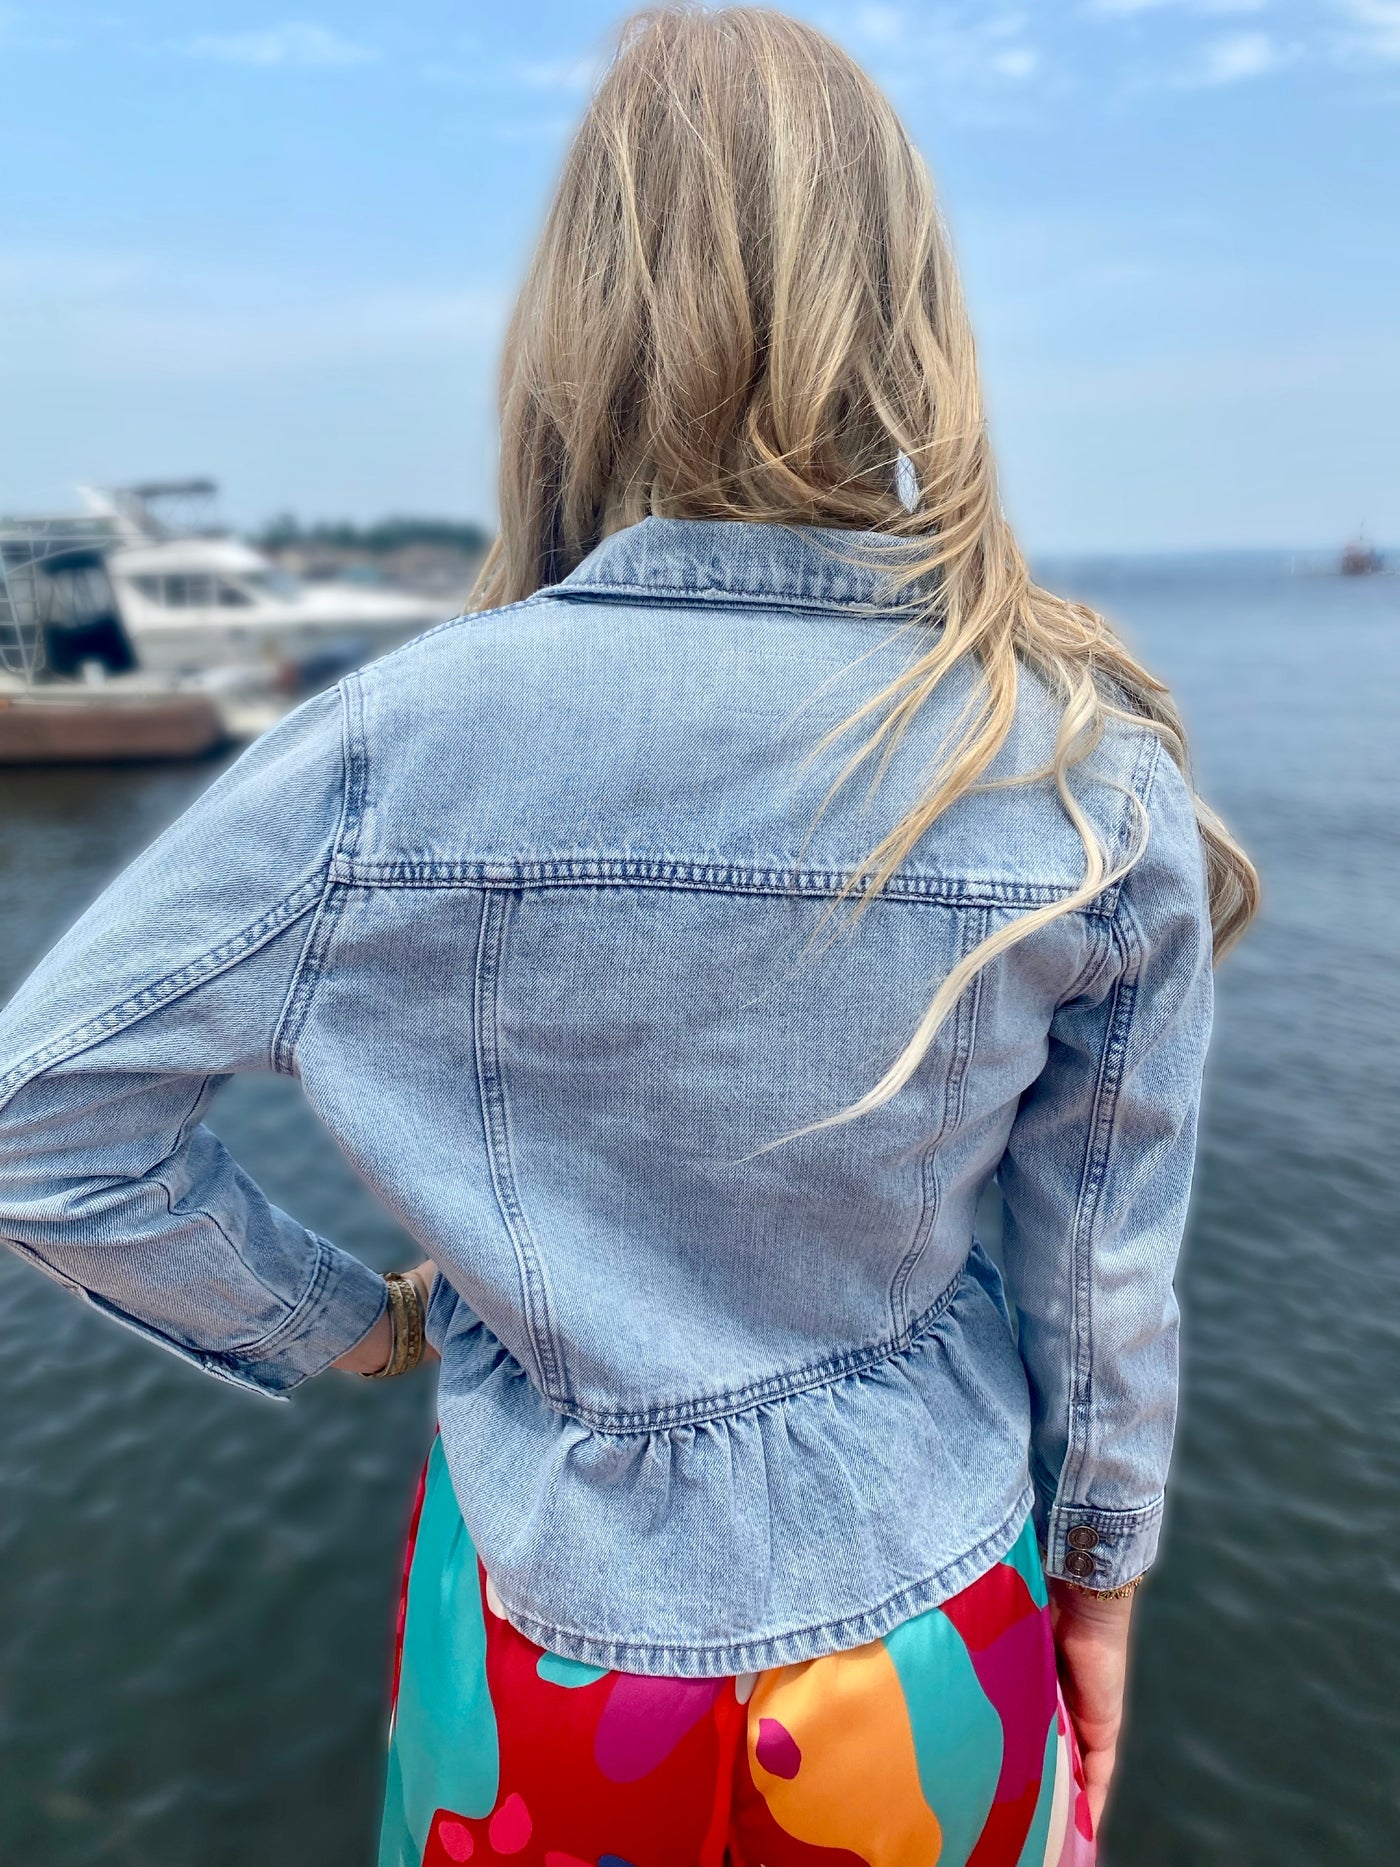 BACK VIEW OF AVA IN JACKET